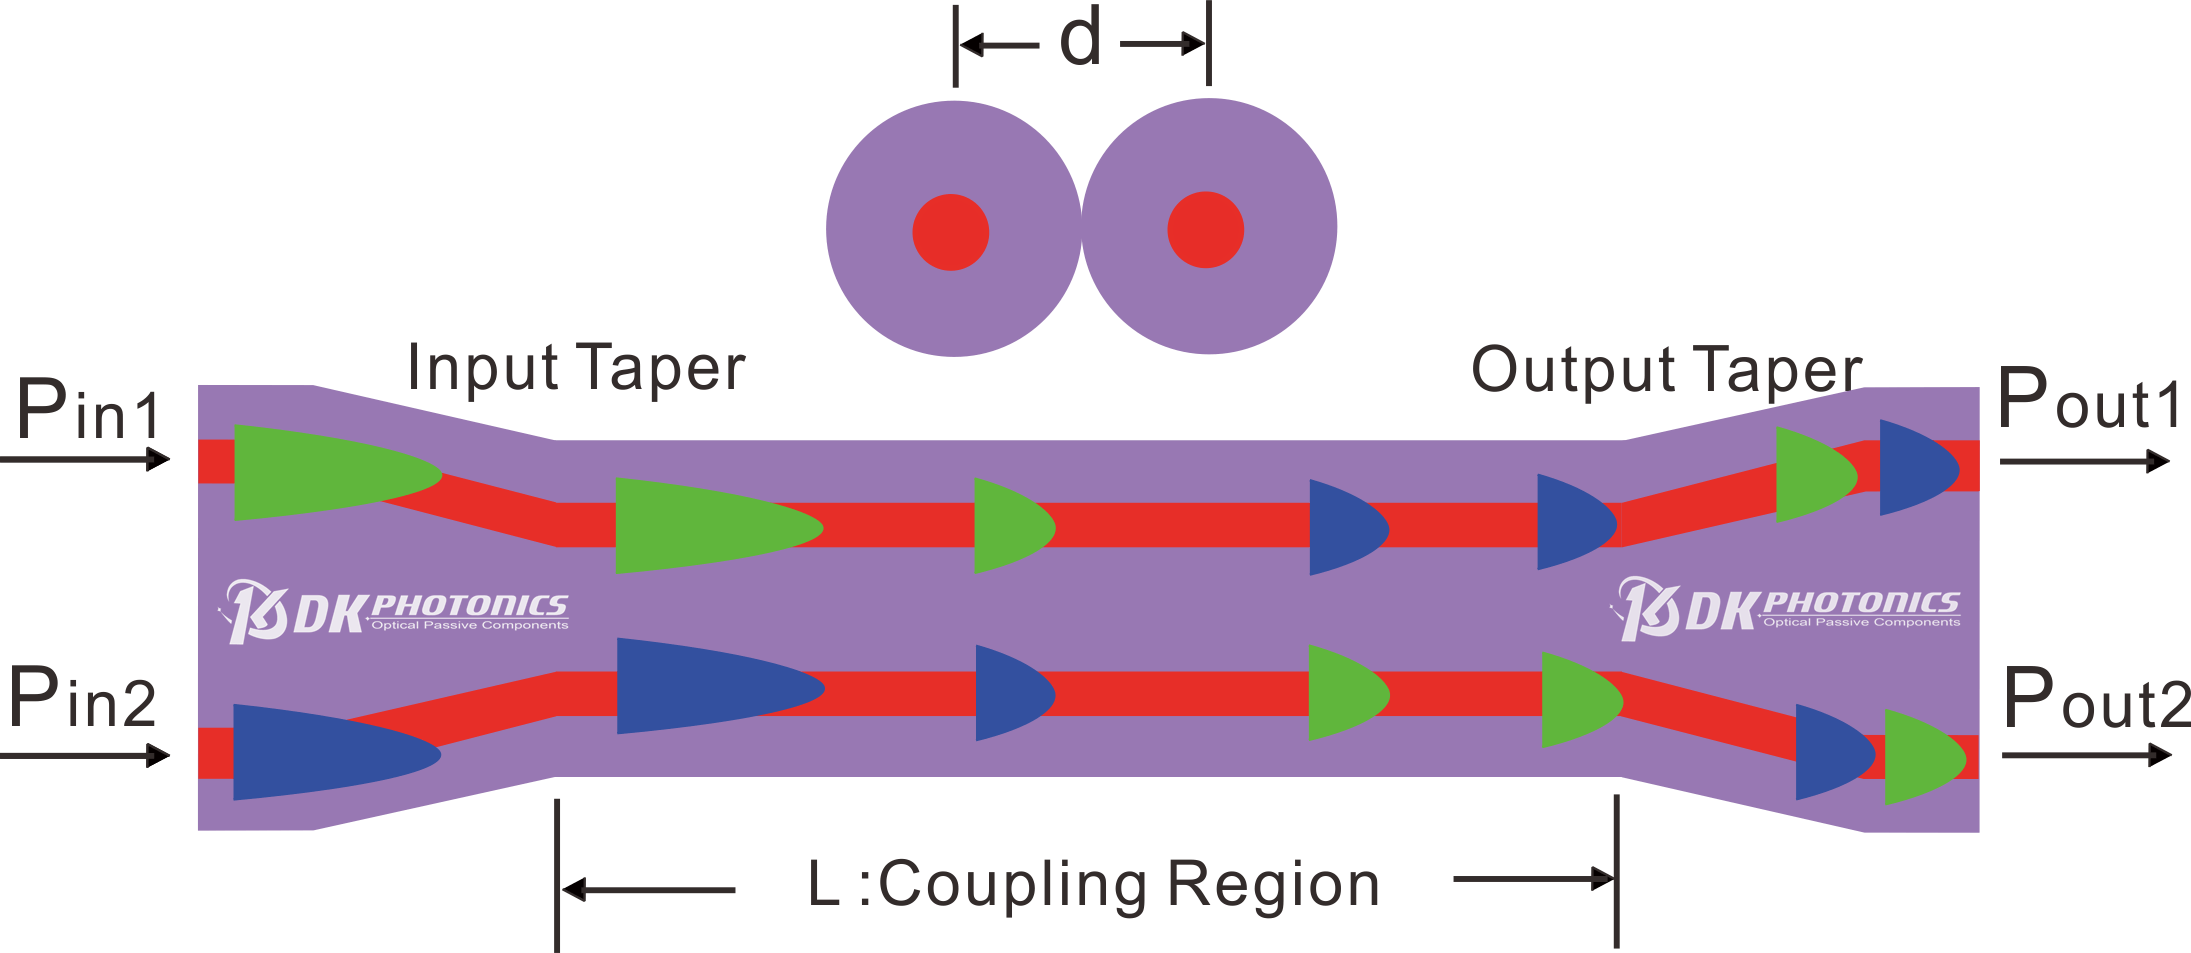 Schematic diagram of regional structure and optical coupling distribution of fused taper